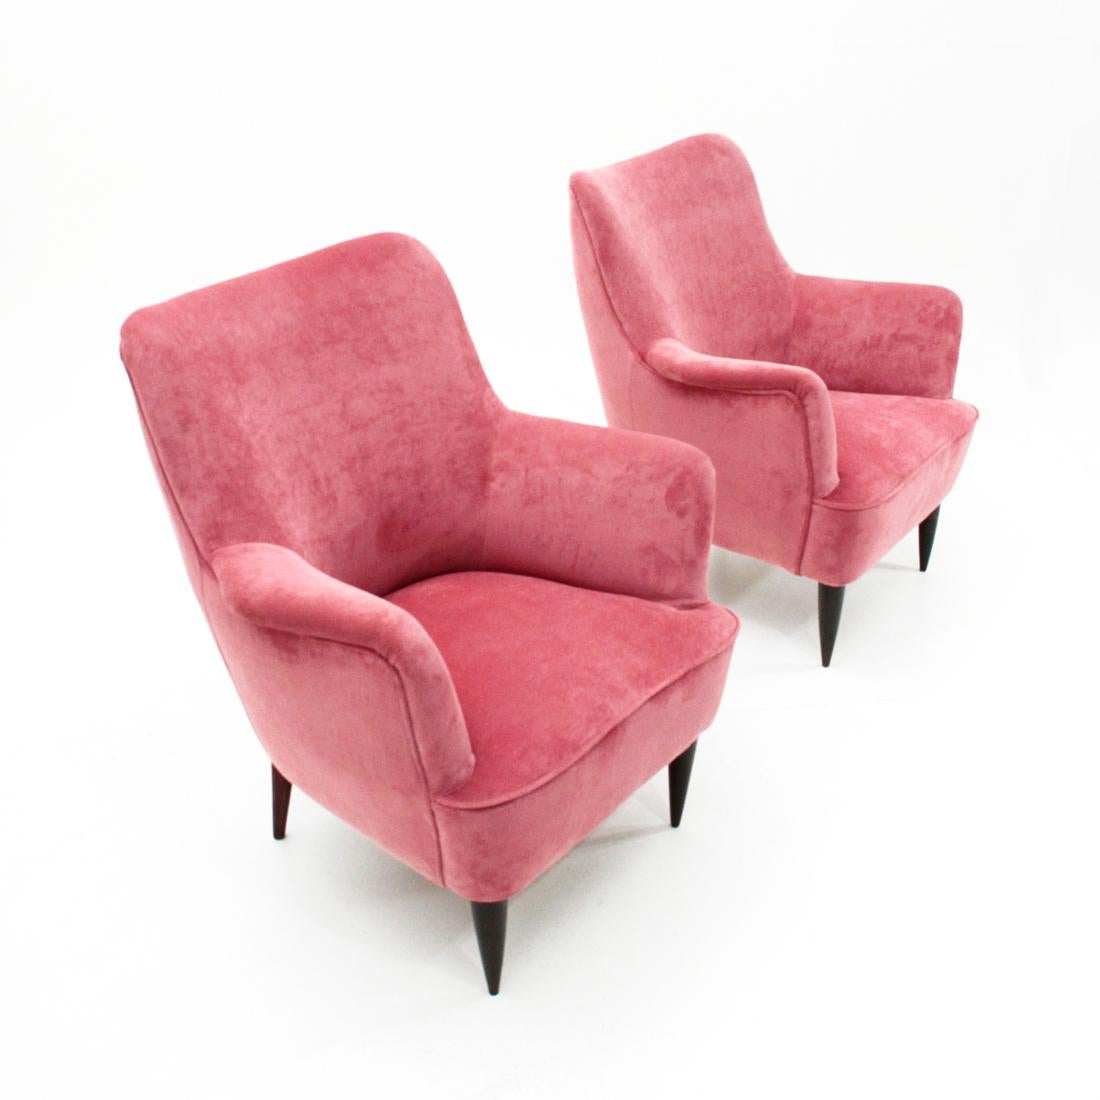 Pair of Italian manufacturing armchairs produced in the 1950s.
Wooden structure padded and lined in new pink velvet fabric.
Legs in tapered wood.
Good general conditions, some signs due to normal use over time.

Dimensions: Length 67 cm, depth